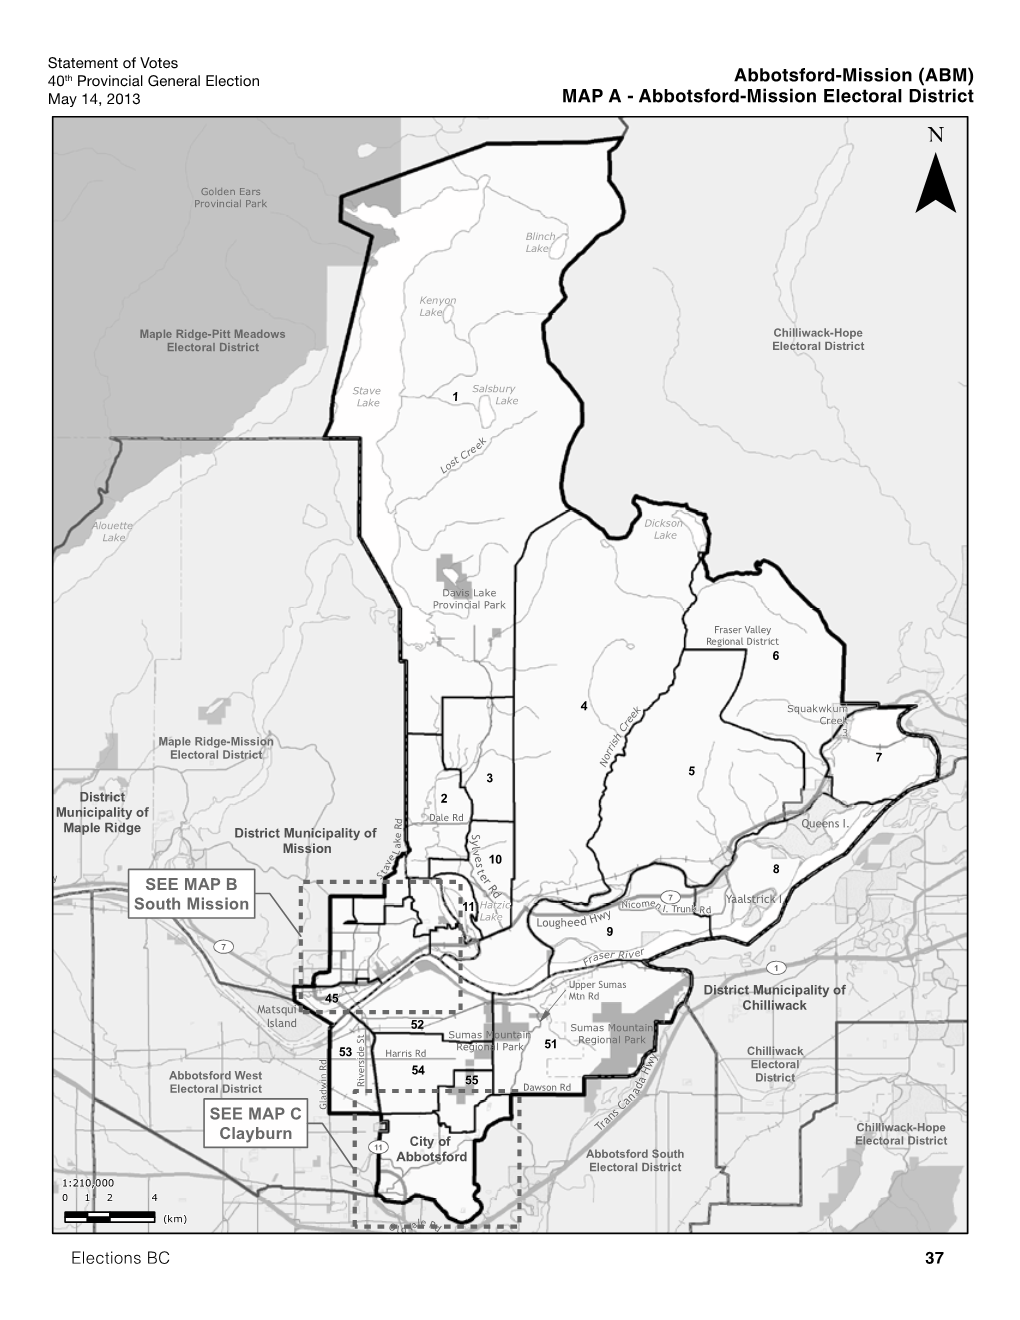 ABM) Long Island May 14, 2013 MAP a - Abbotsford-Mission Electoral District